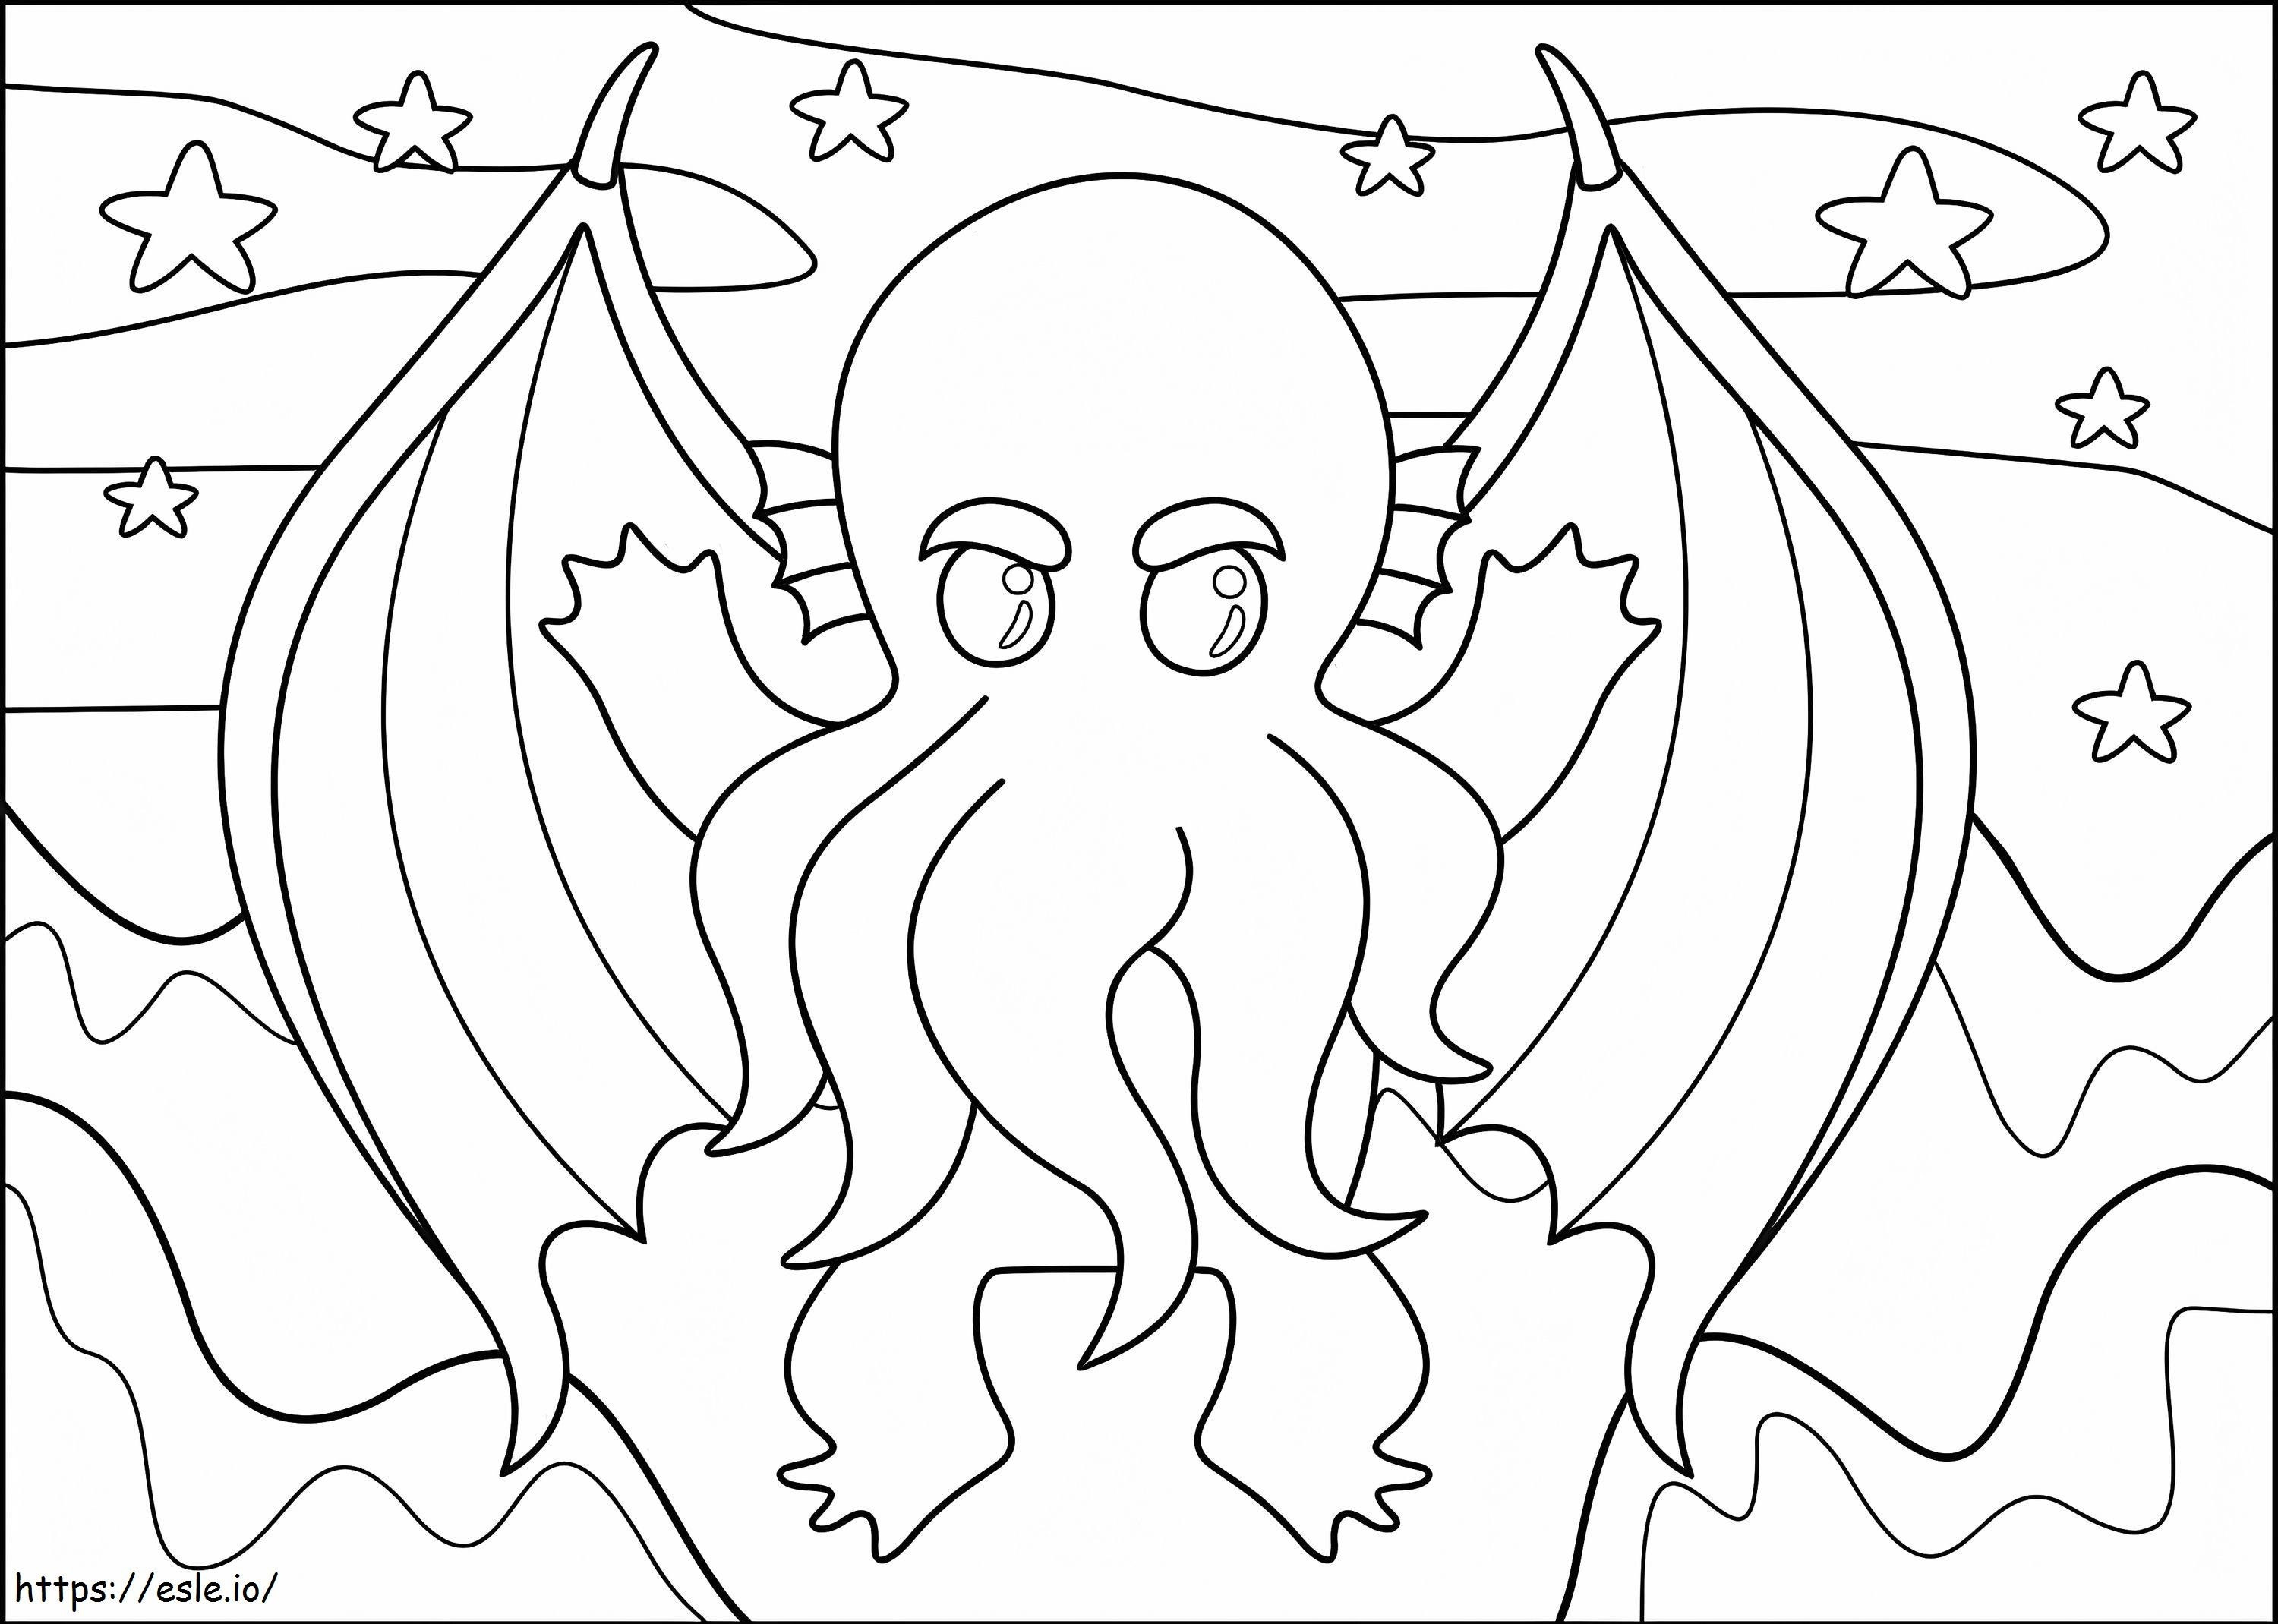 Cthulhu Printable coloring page